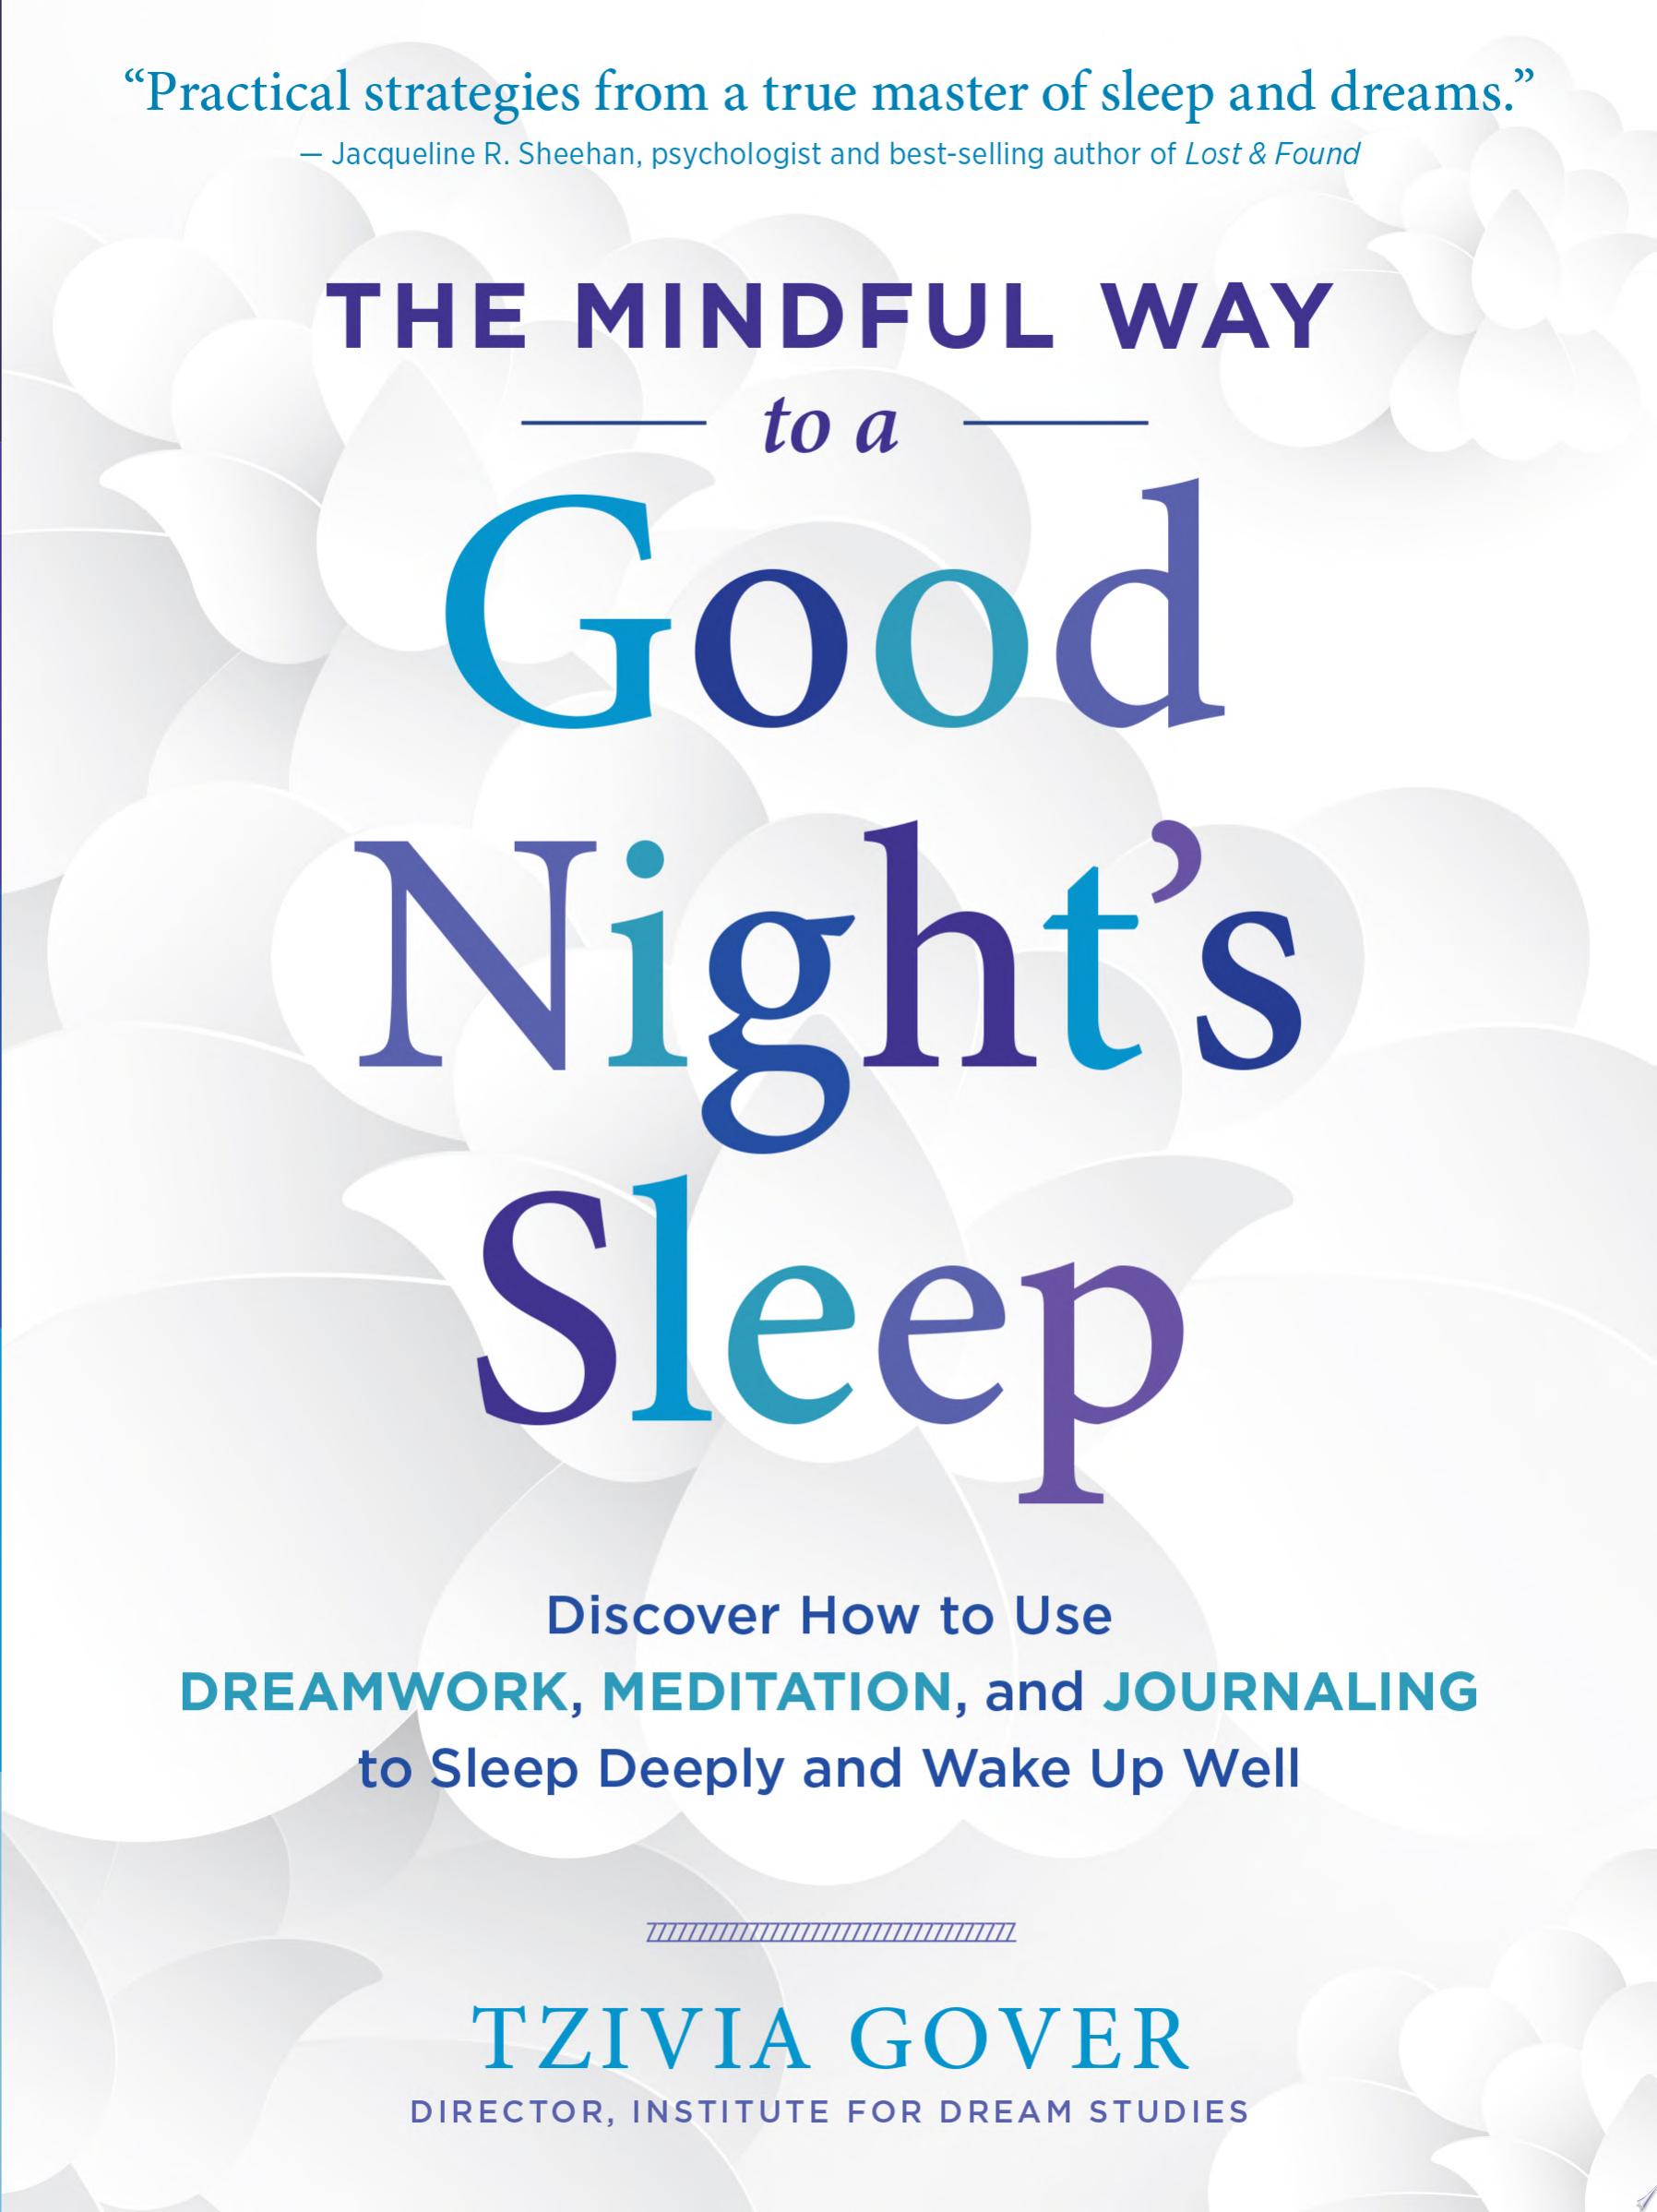 Image for "The Mindful Way to a Good Night's Sleep"